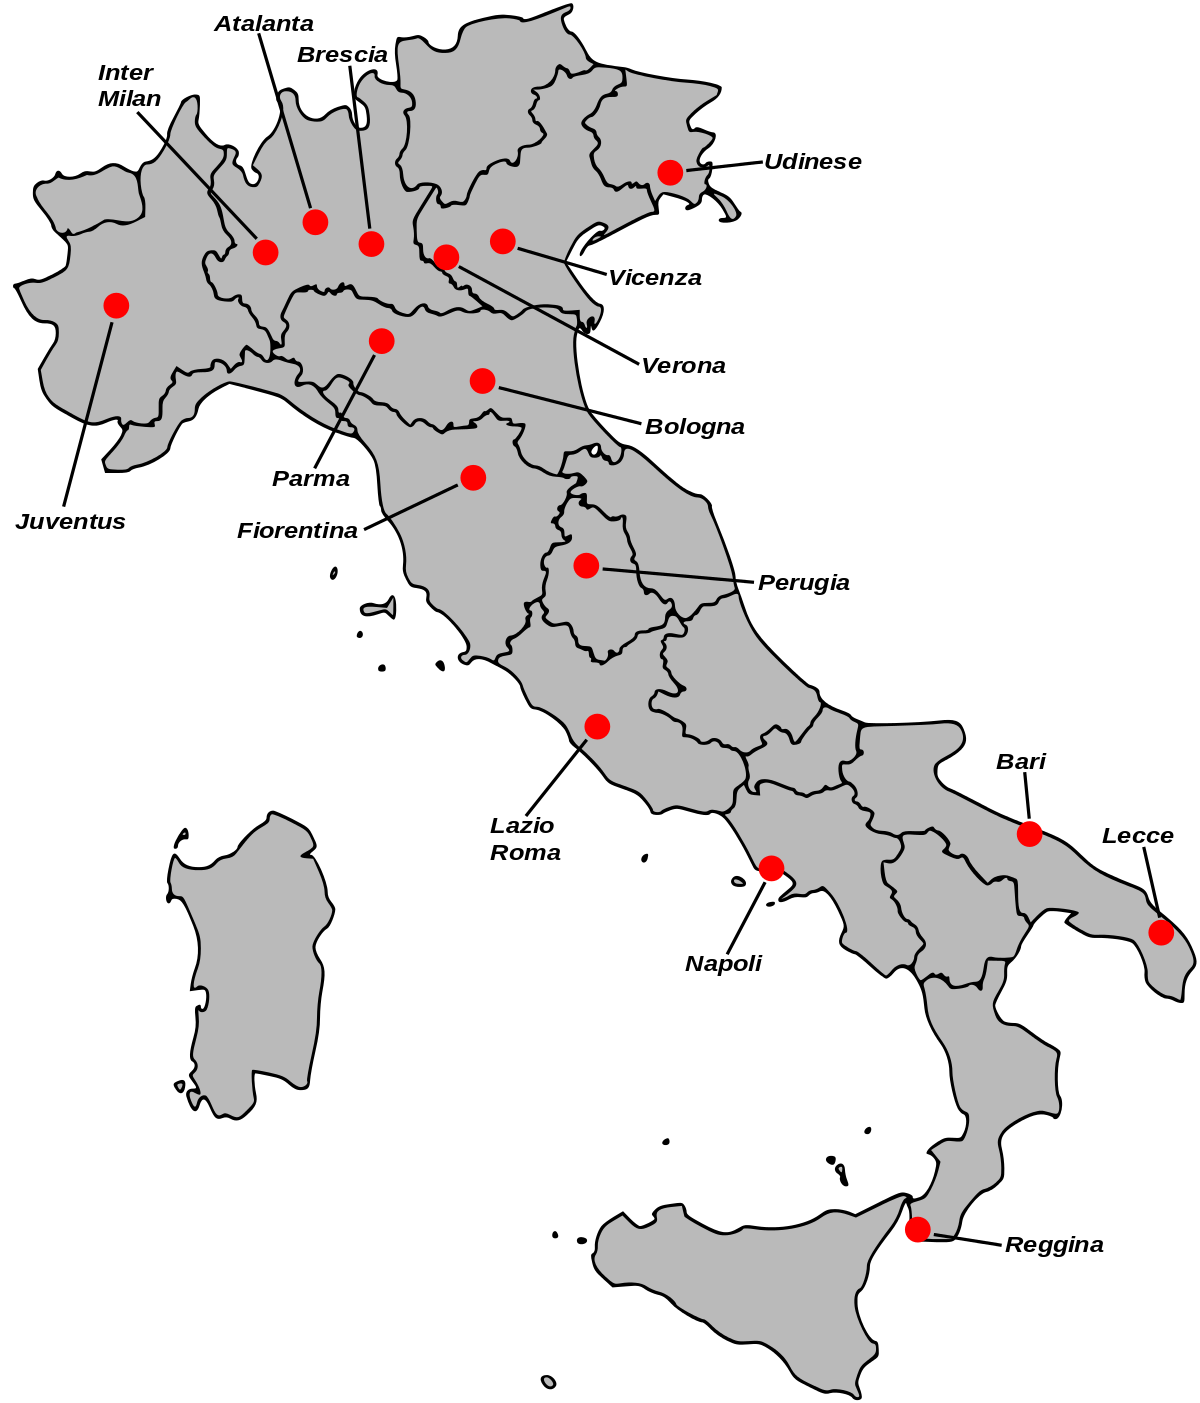 Italy series a